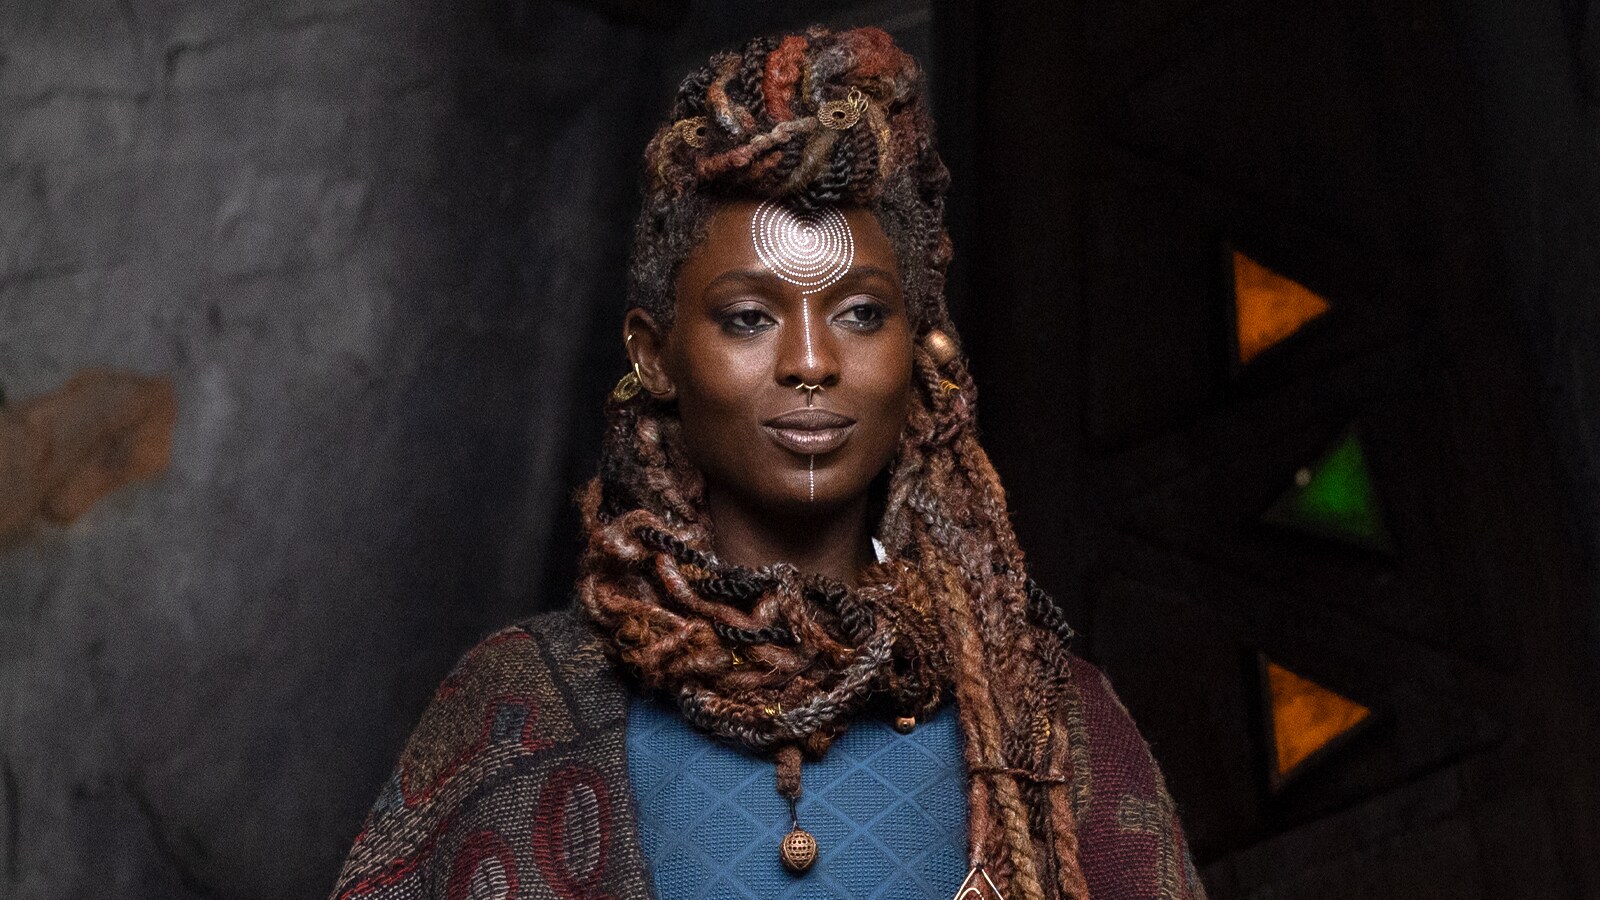 In The Acolyte, Jodie Turner-Smith’s Mother Aniseya is Mothering